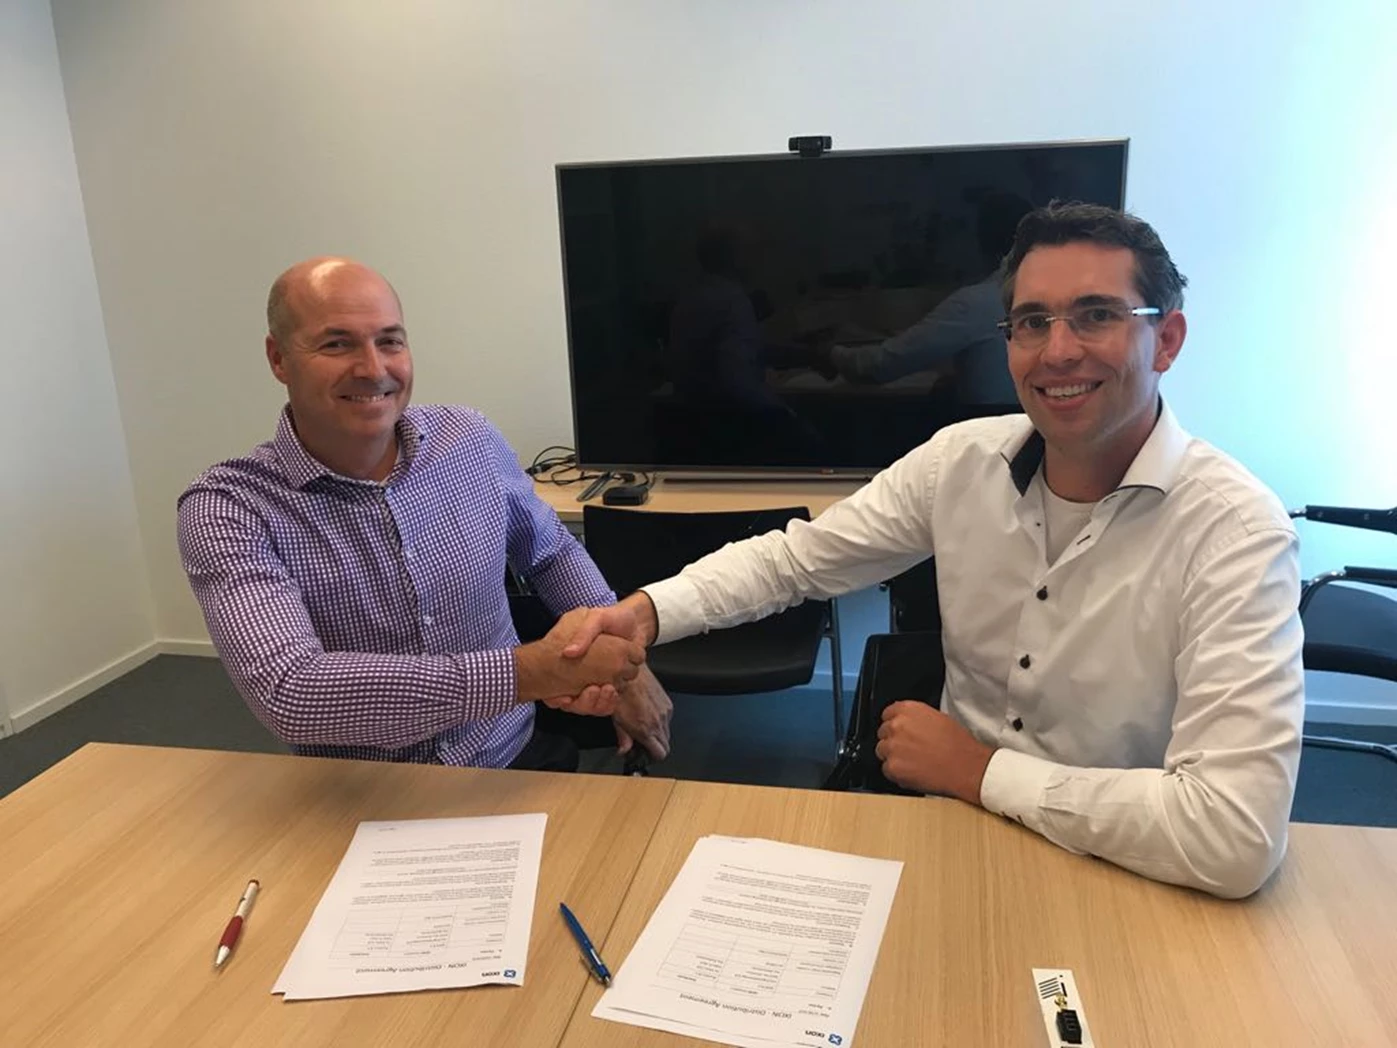 Luc Op den Buijsch from Routeco (Left) and Willem Hofmans from IXON (Right) shake hands on new Cooperation.